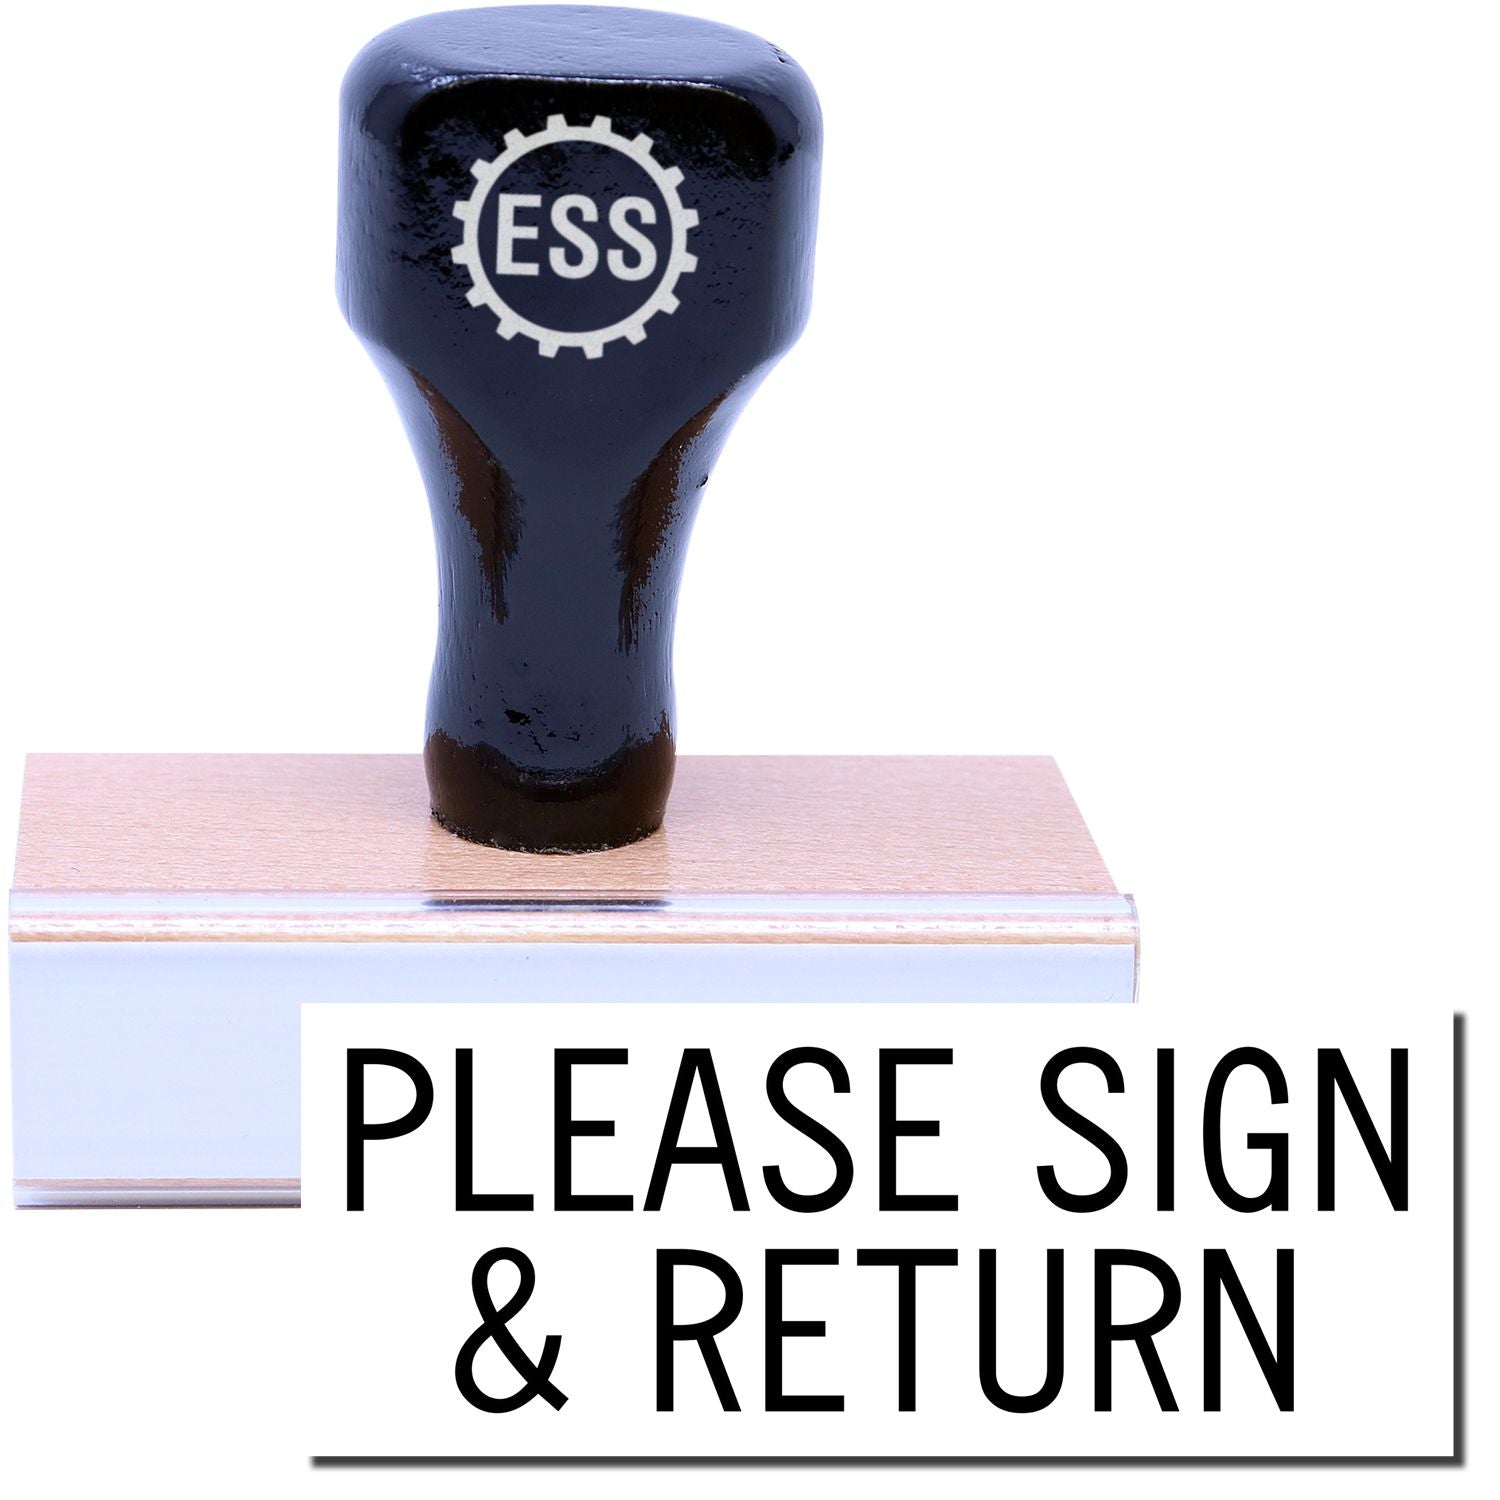 A stock office rubber stamp with a stamped image showing how the text "PLEASE SIGN & RETURN" is displayed after stamping.